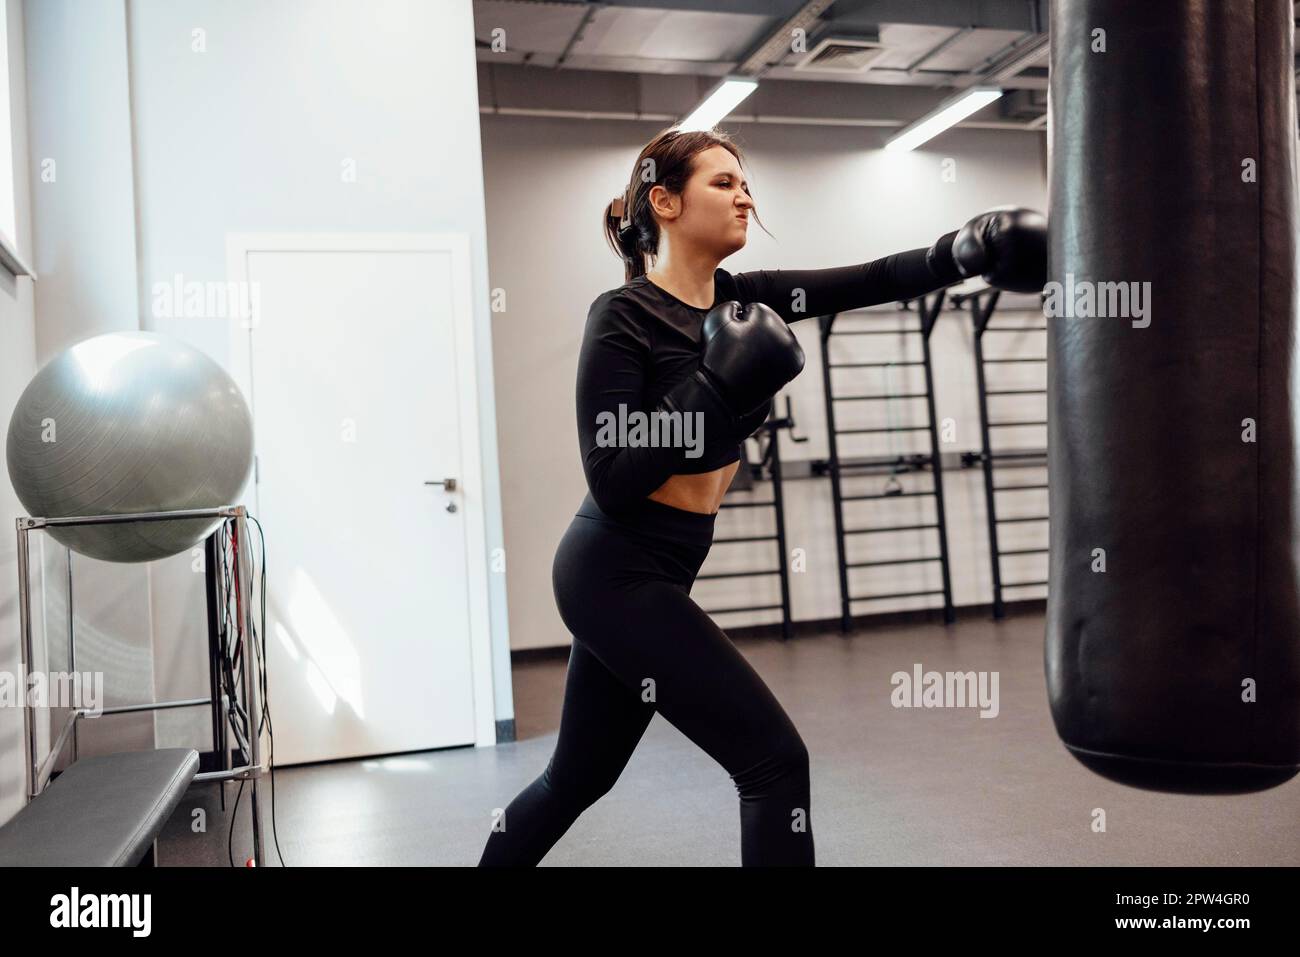 Young Asia lady kickboxing exercise workout punching bag tough female  fighter practice boxing in gym fitness class. Sportswoman recreational  activity, functional training, healthy lifestyle concept. Stock Photo